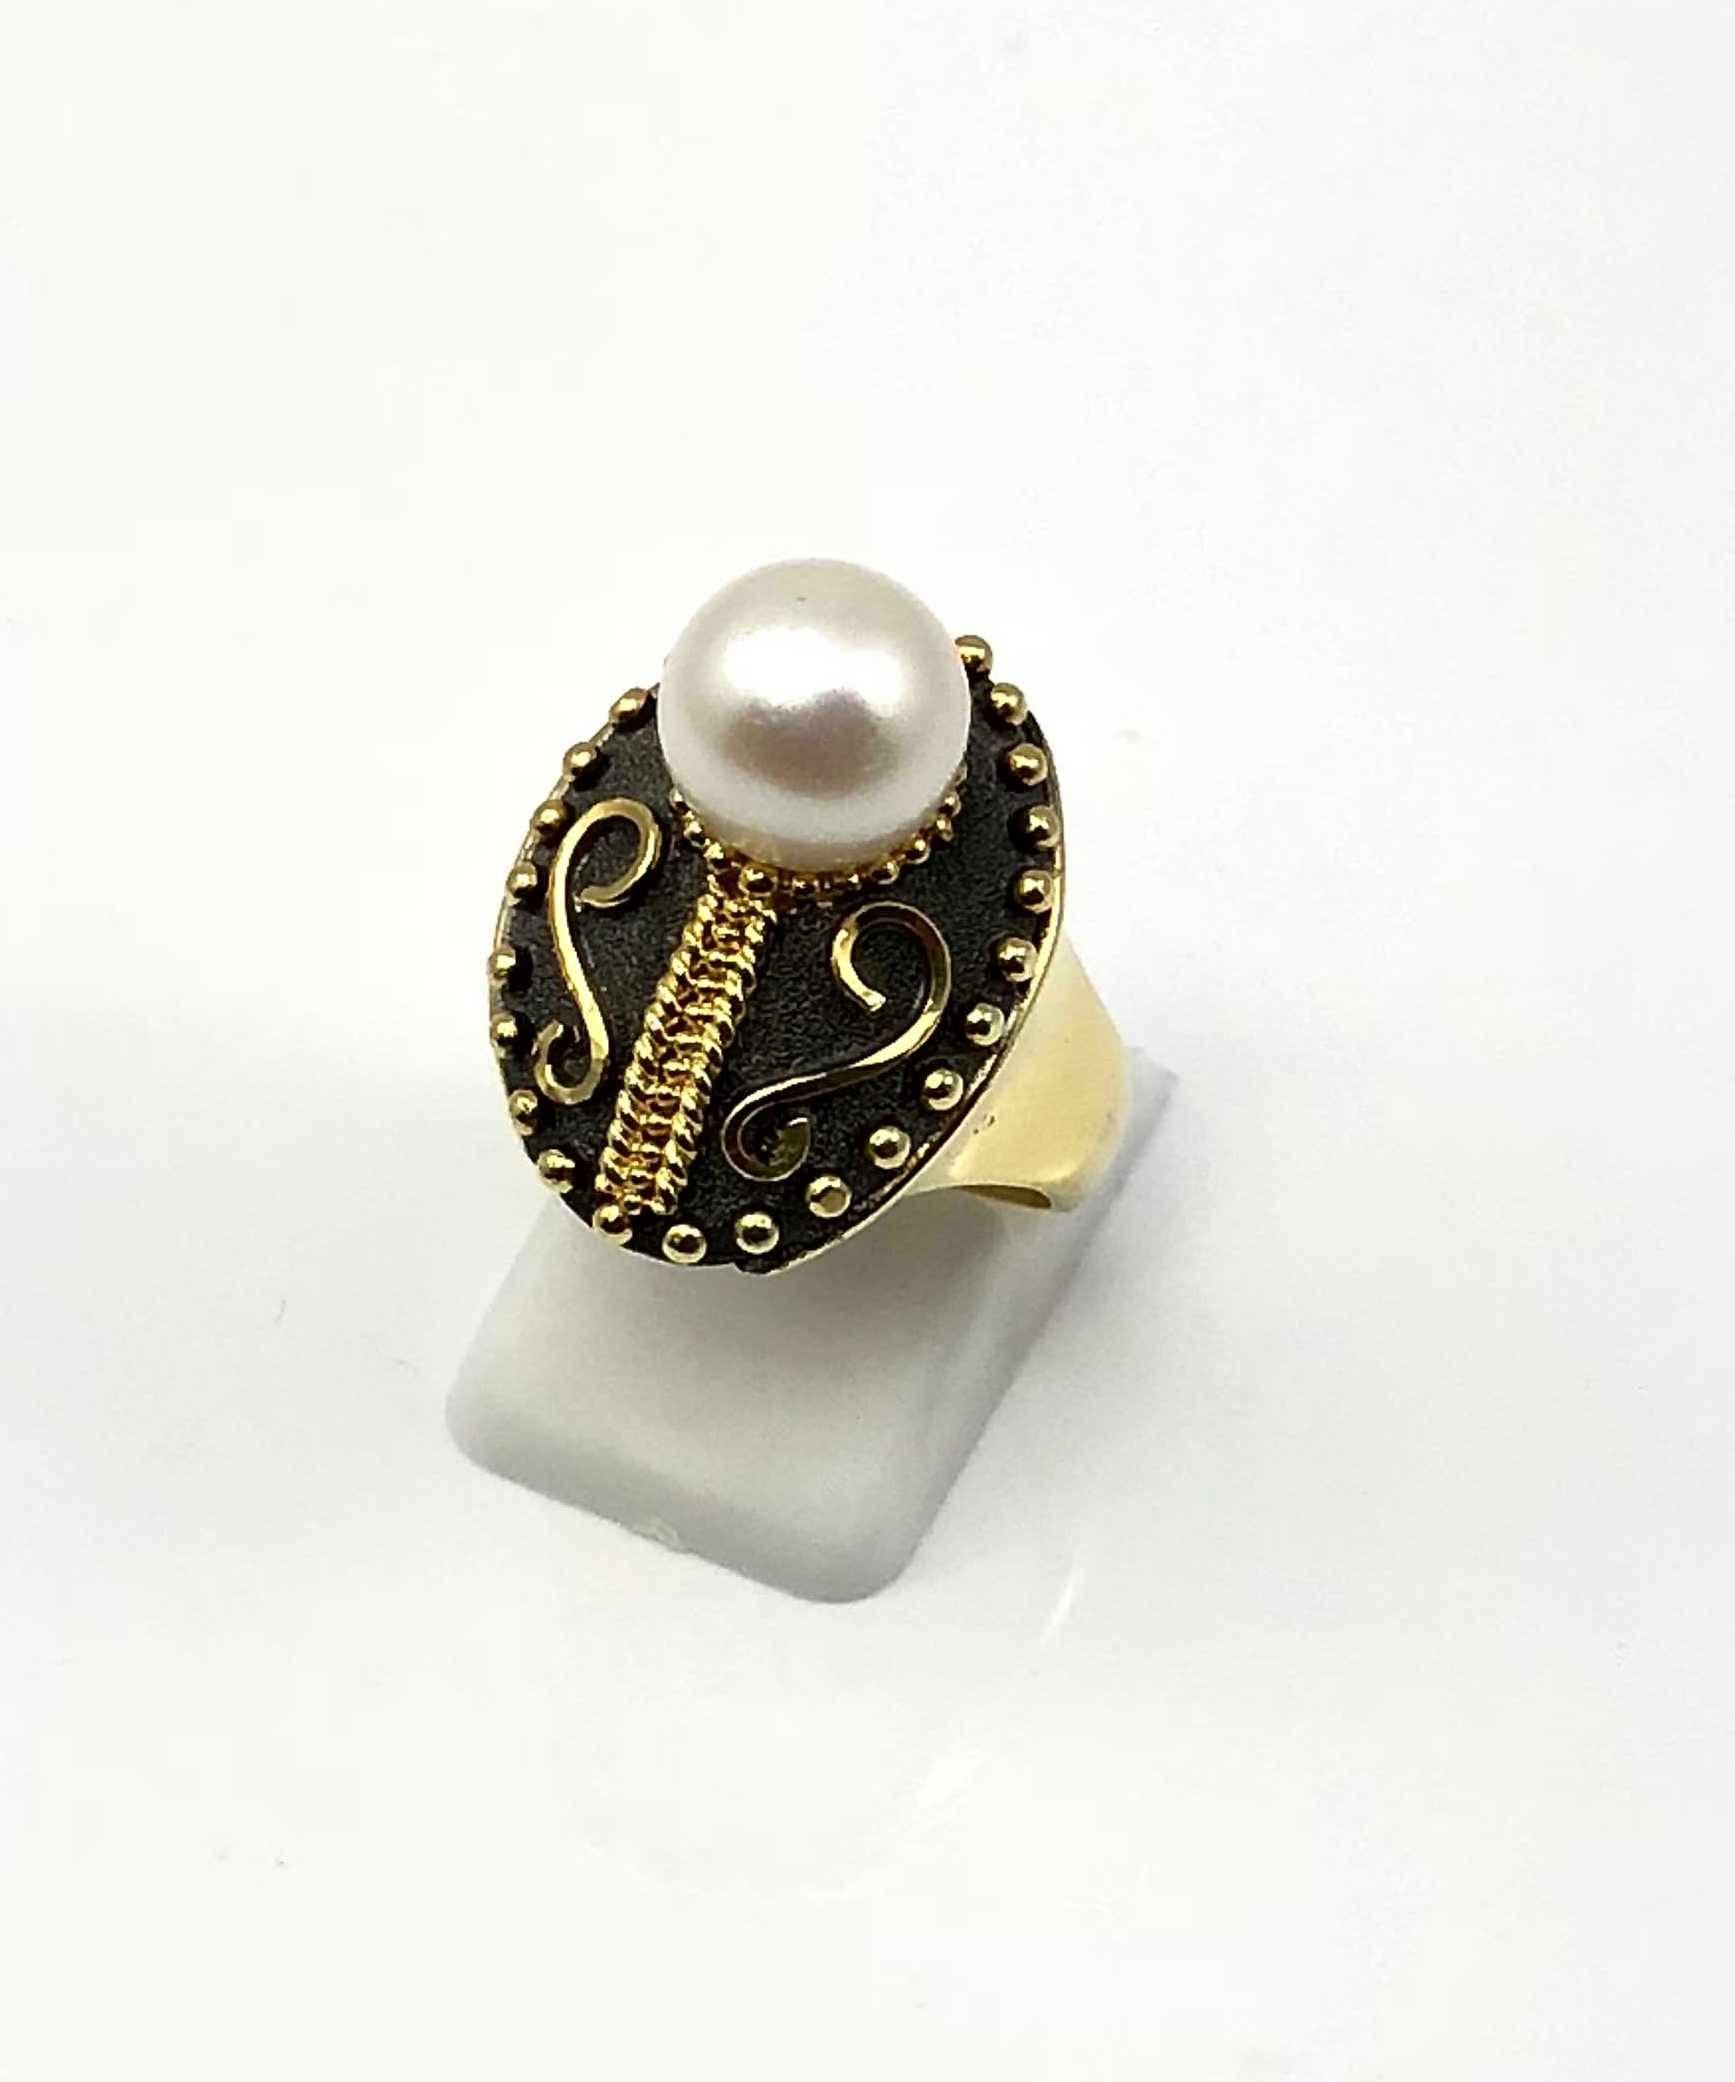 S.Georgios designer ring is all handmade from solid 18 Karat Yellow Gold and custom-made. This Byzantine-style ring is microscopically decorated with granulation work - with gold beads and wires, and a Black Oxidized Rhodium velvet background. This